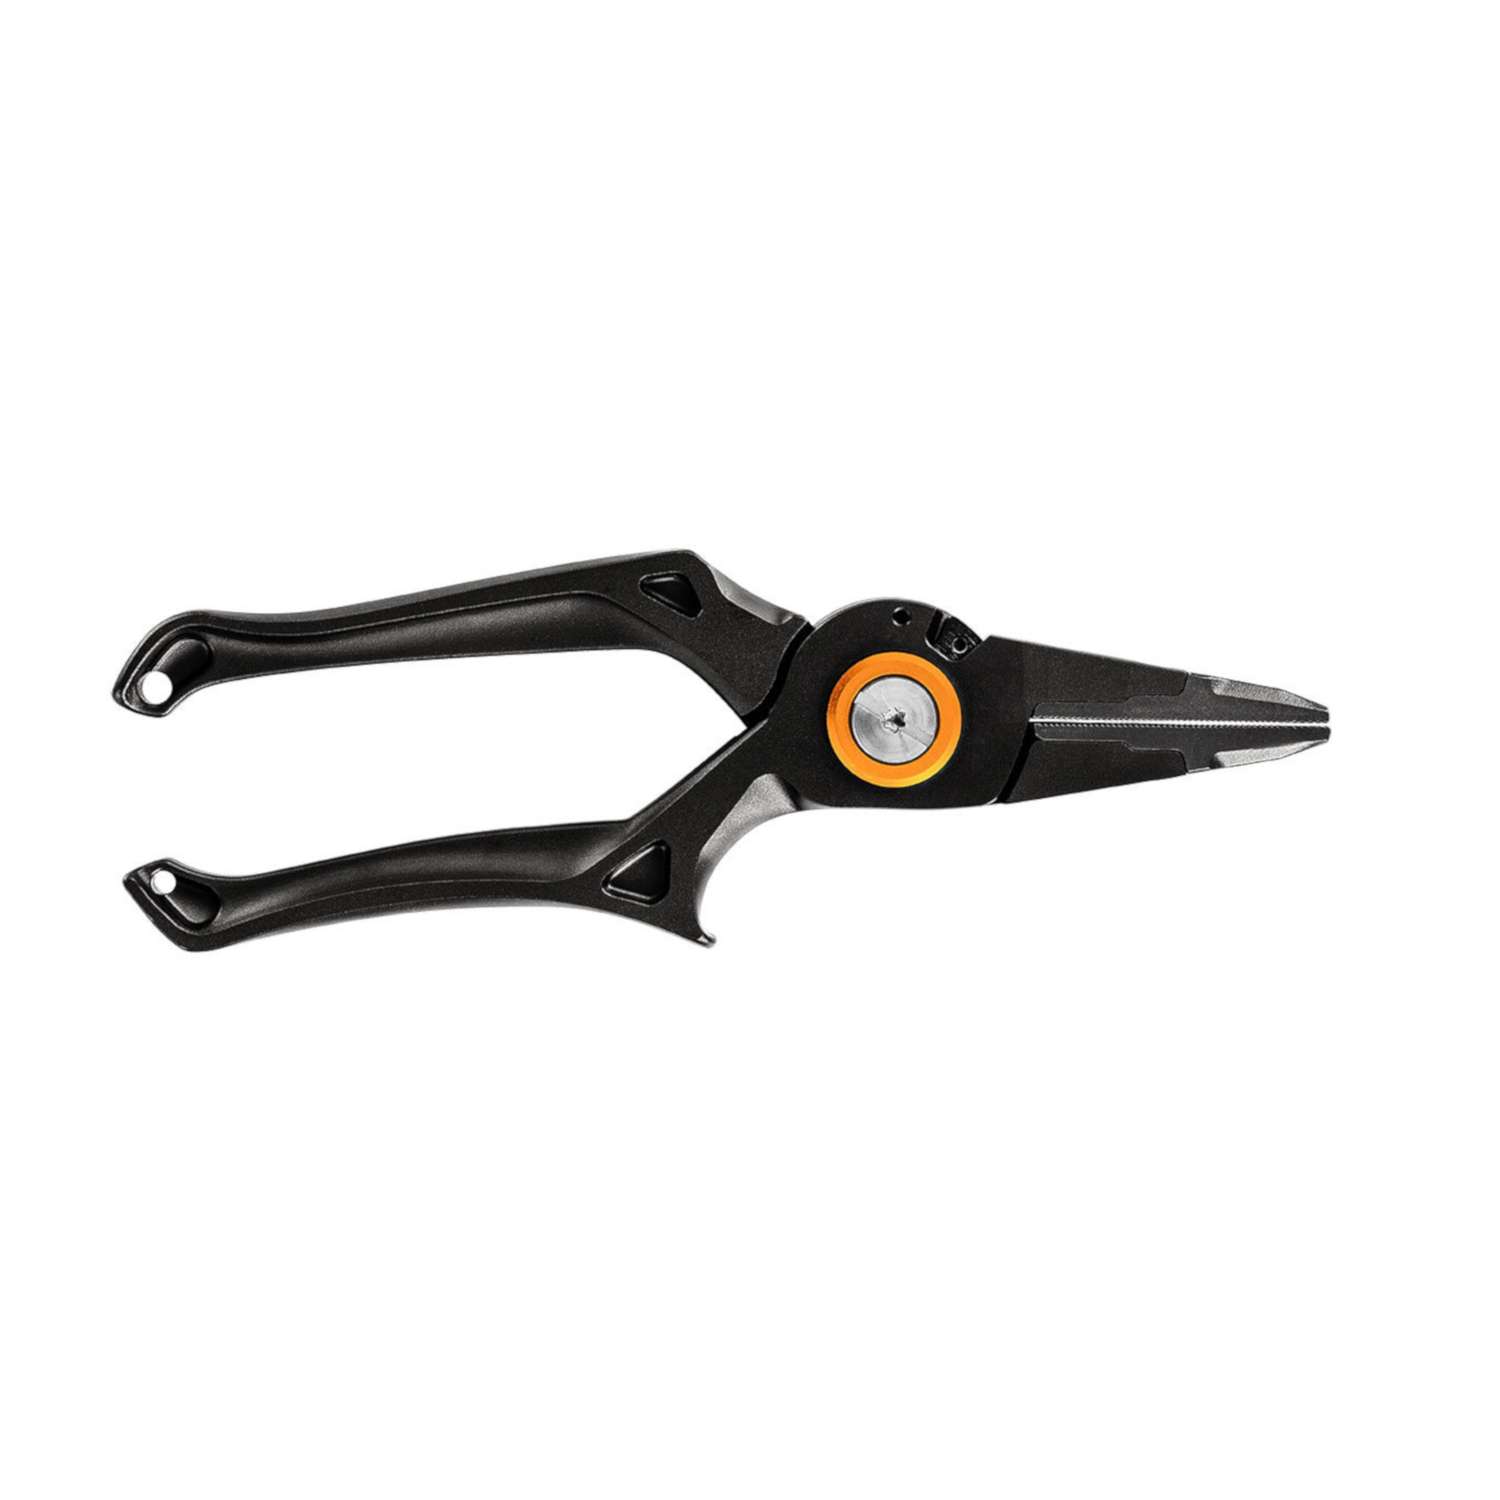 Gerber Fishing and Angling Plier 7.5 in. - Ace Hardware